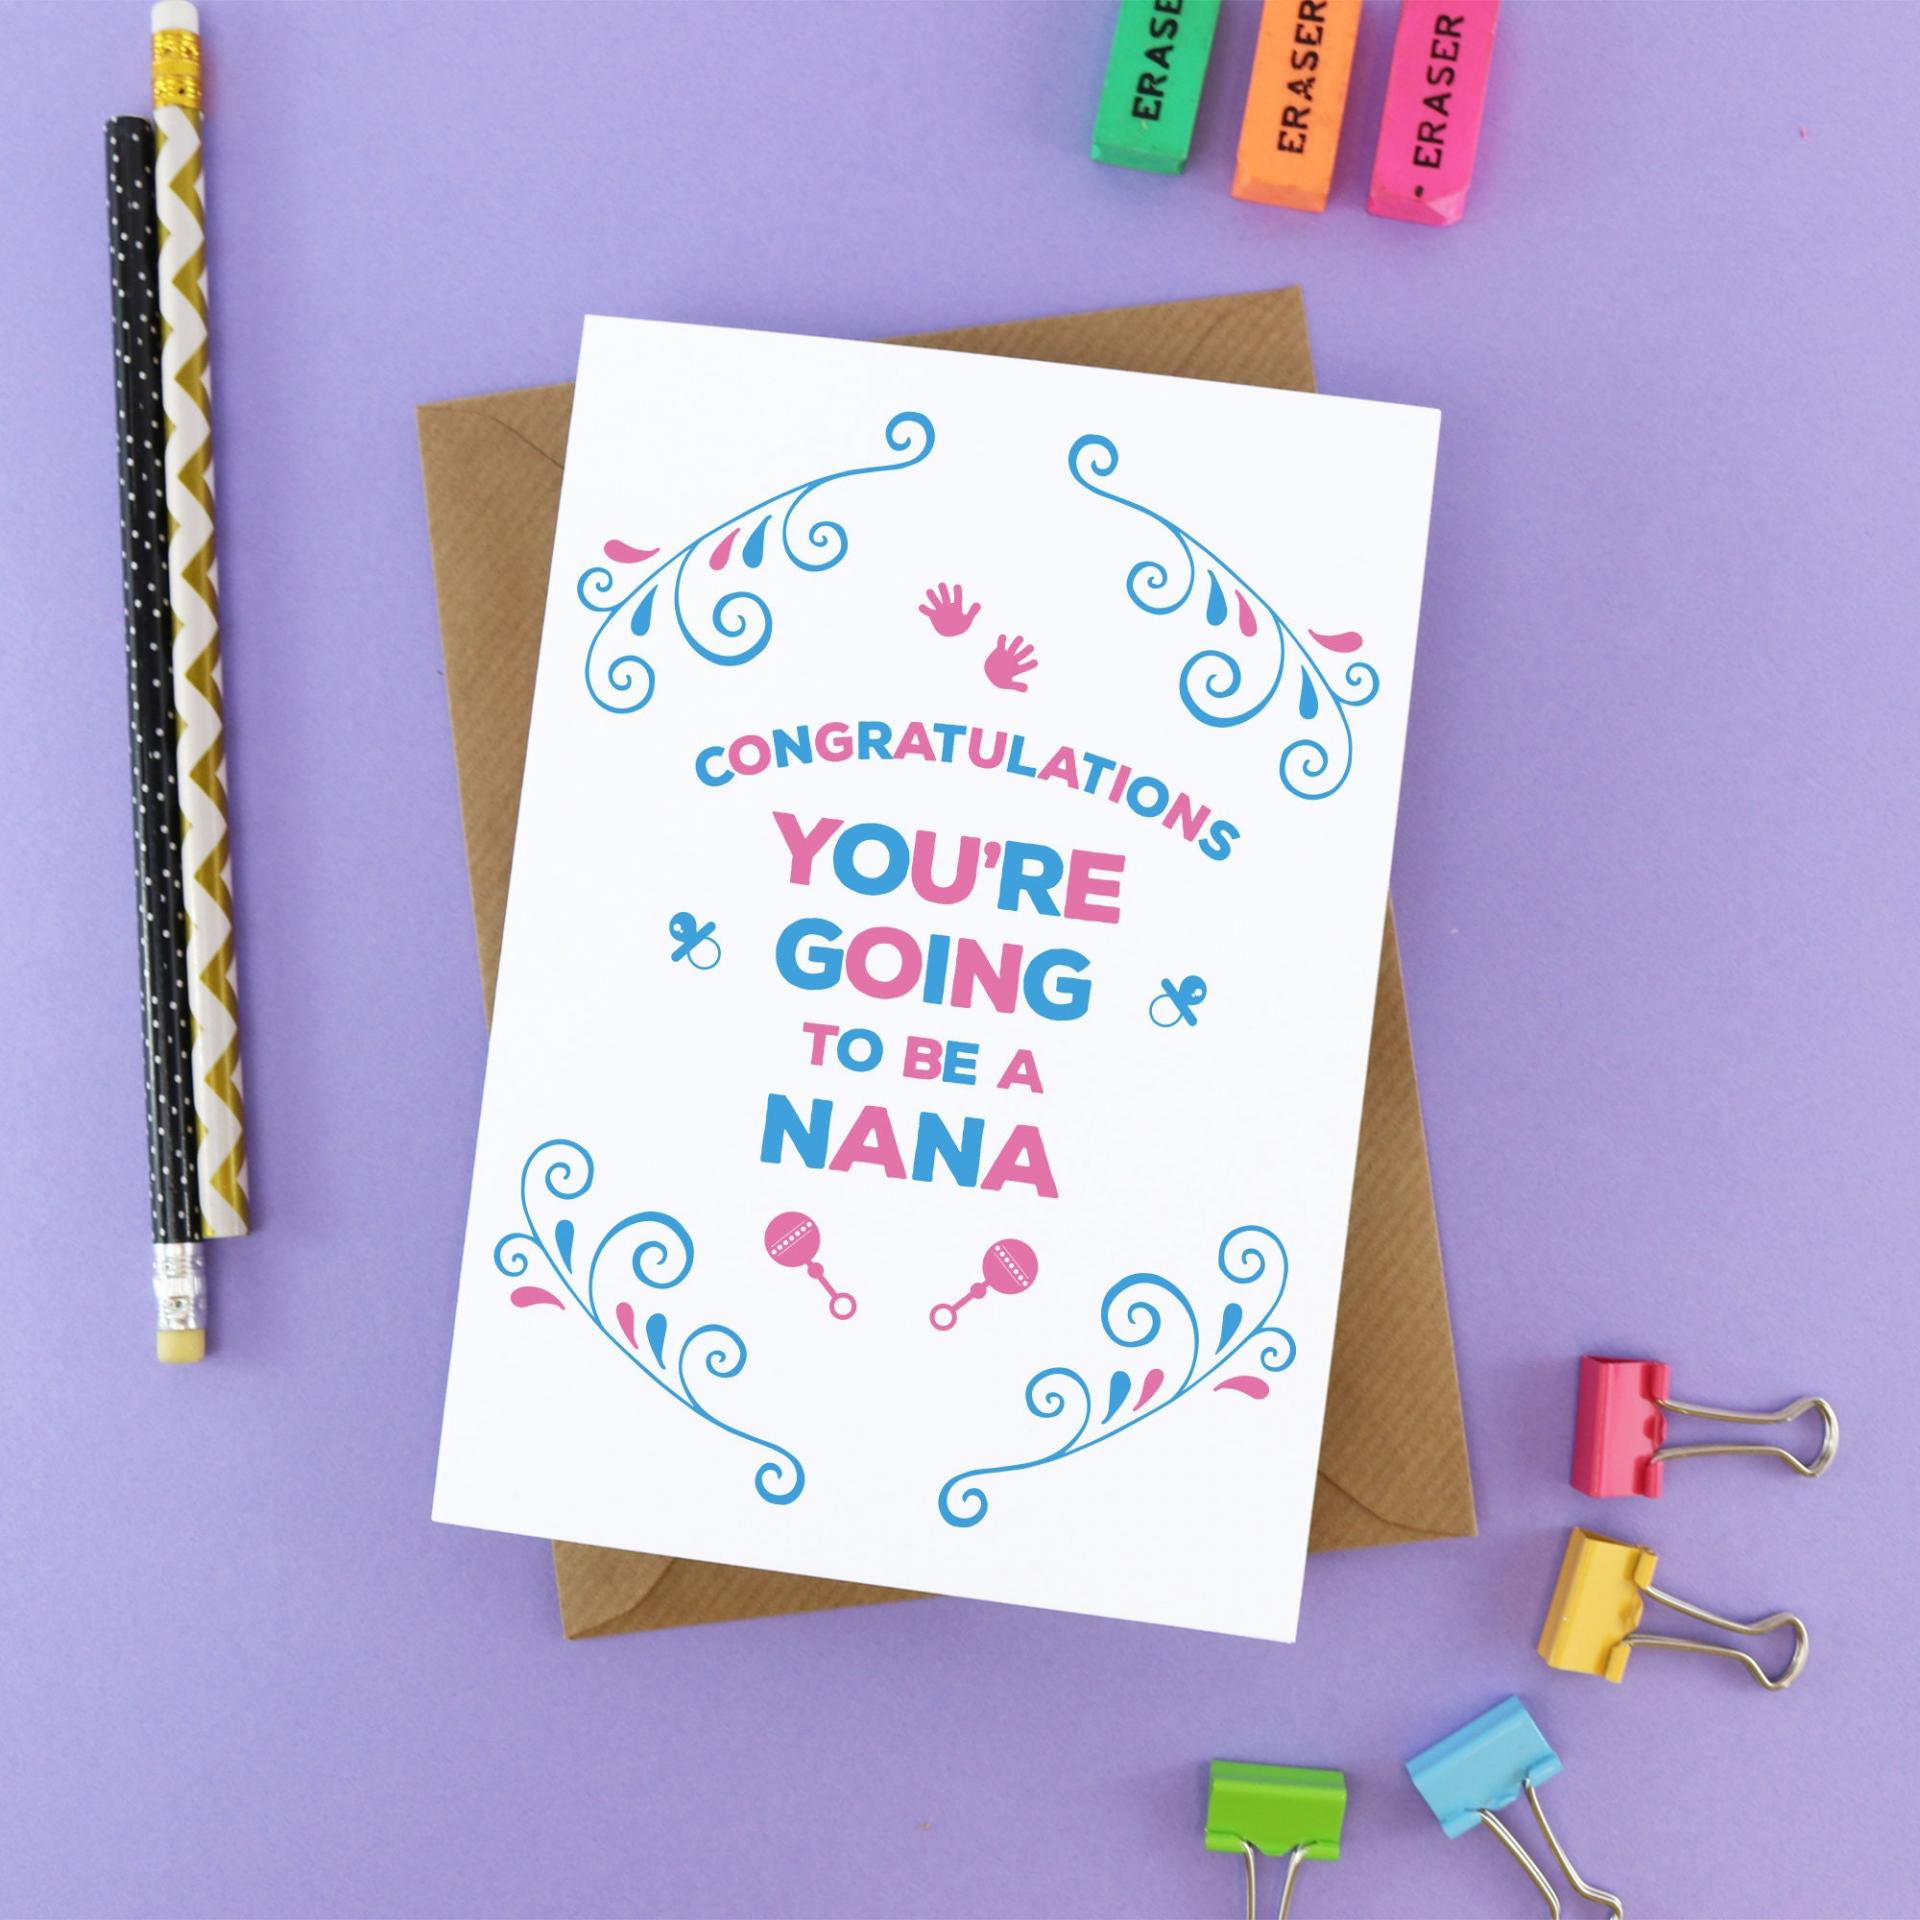 You're going to be a Grandmother Card - Nan Grandma Card, Expecting Card, New Baby Card, Pregnancy Announce, Pregnancy Reveal, Pregnancy